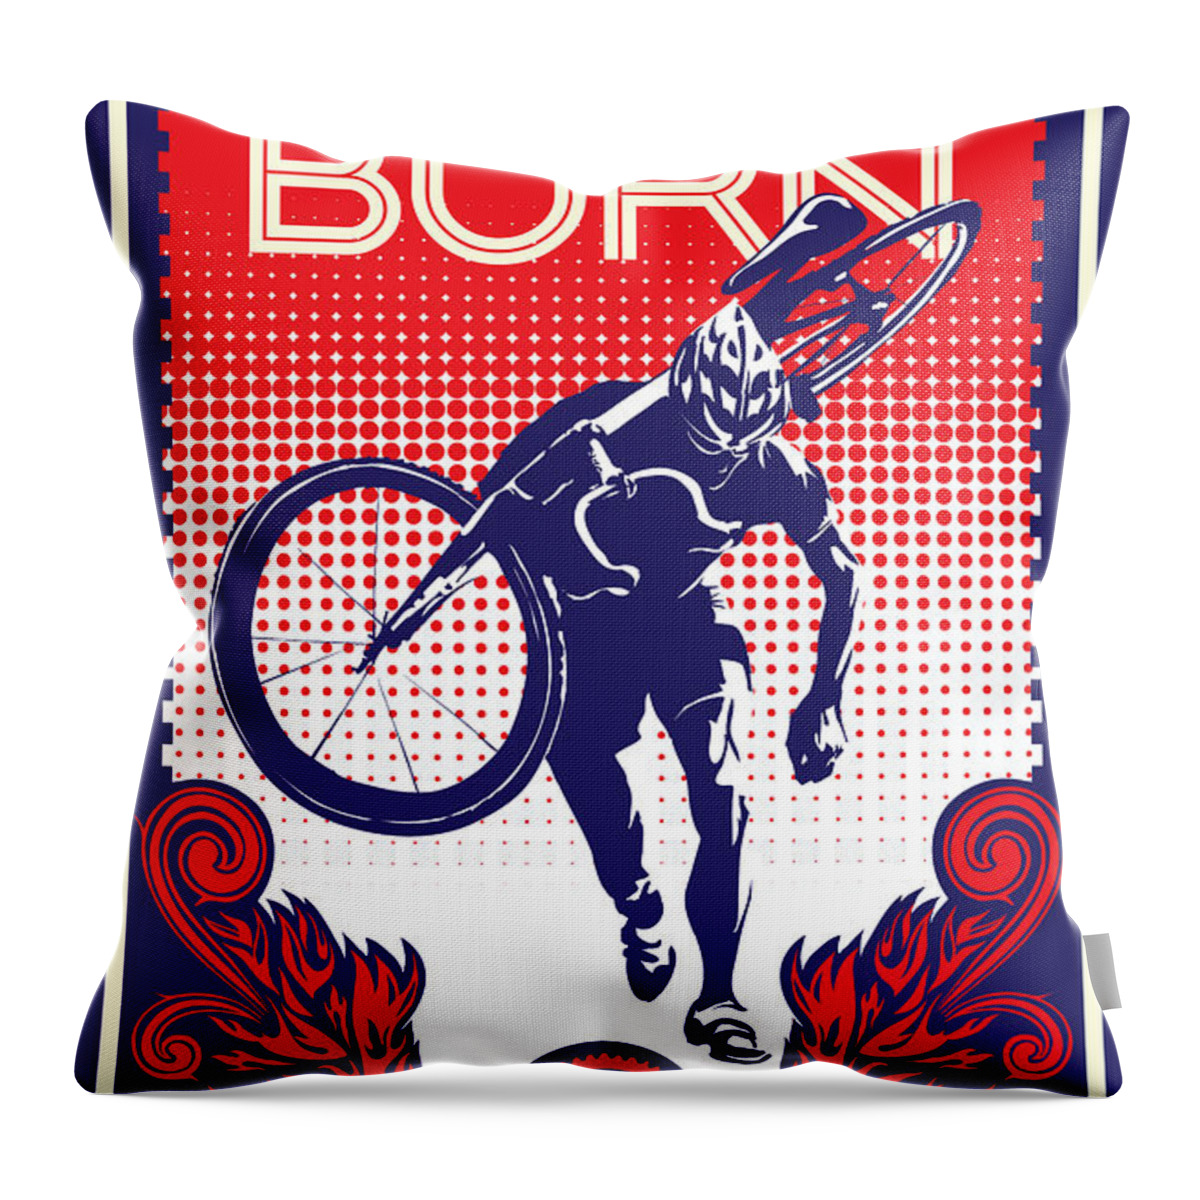 Cyclocross Art Throw Pillow featuring the painting Feel the Burn by Sassan Filsoof